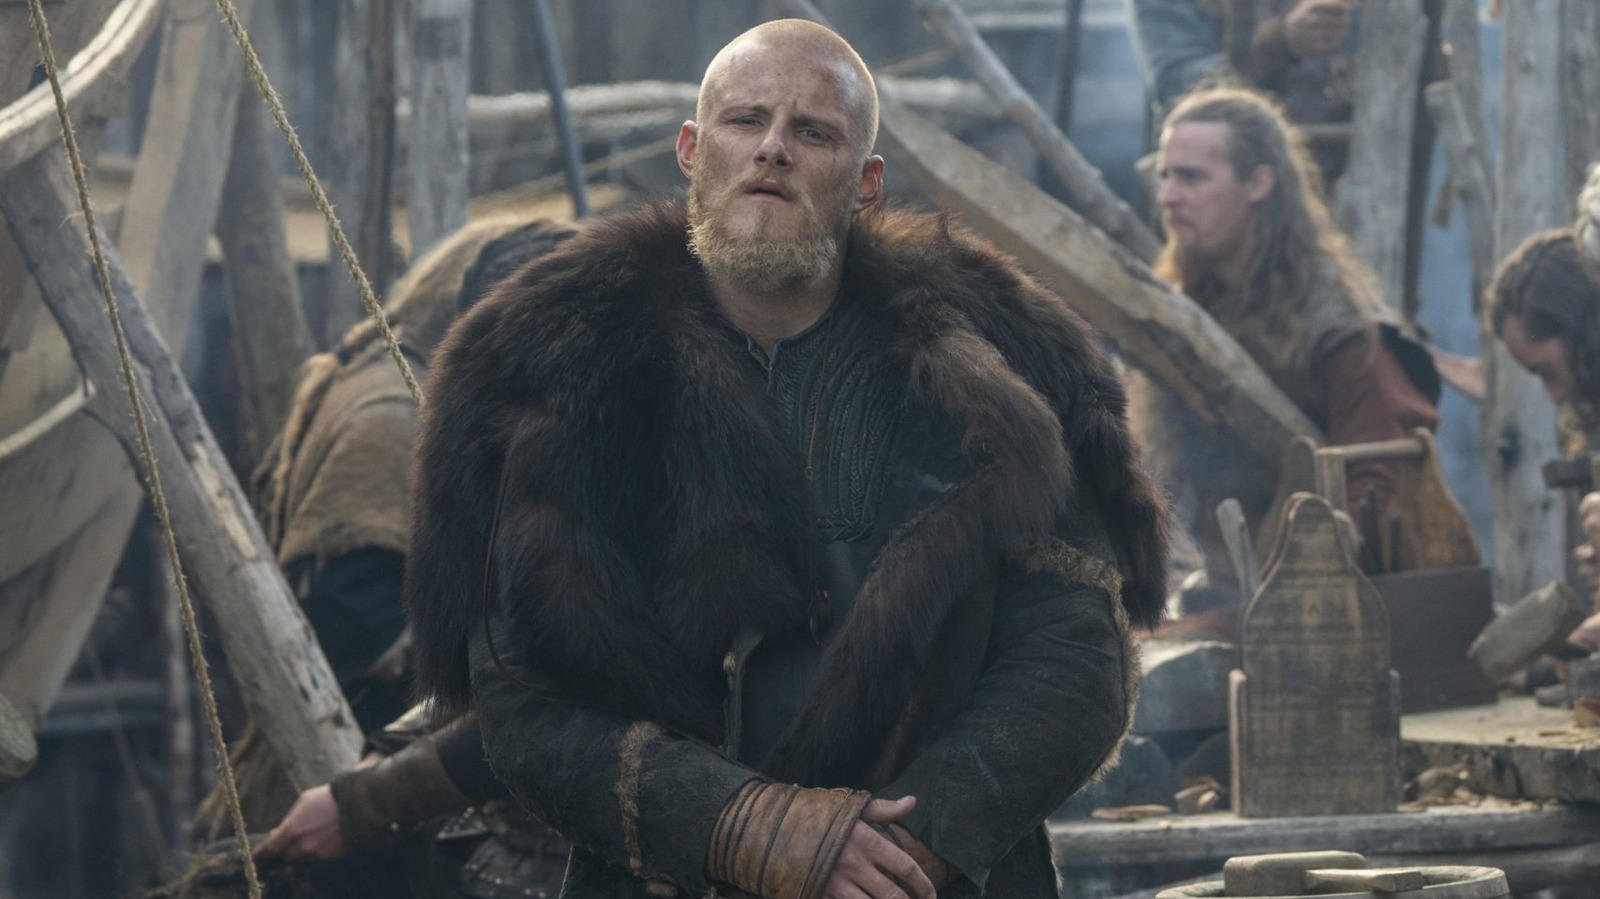 What Really Happened To The Real Life Versions Of These Vikings